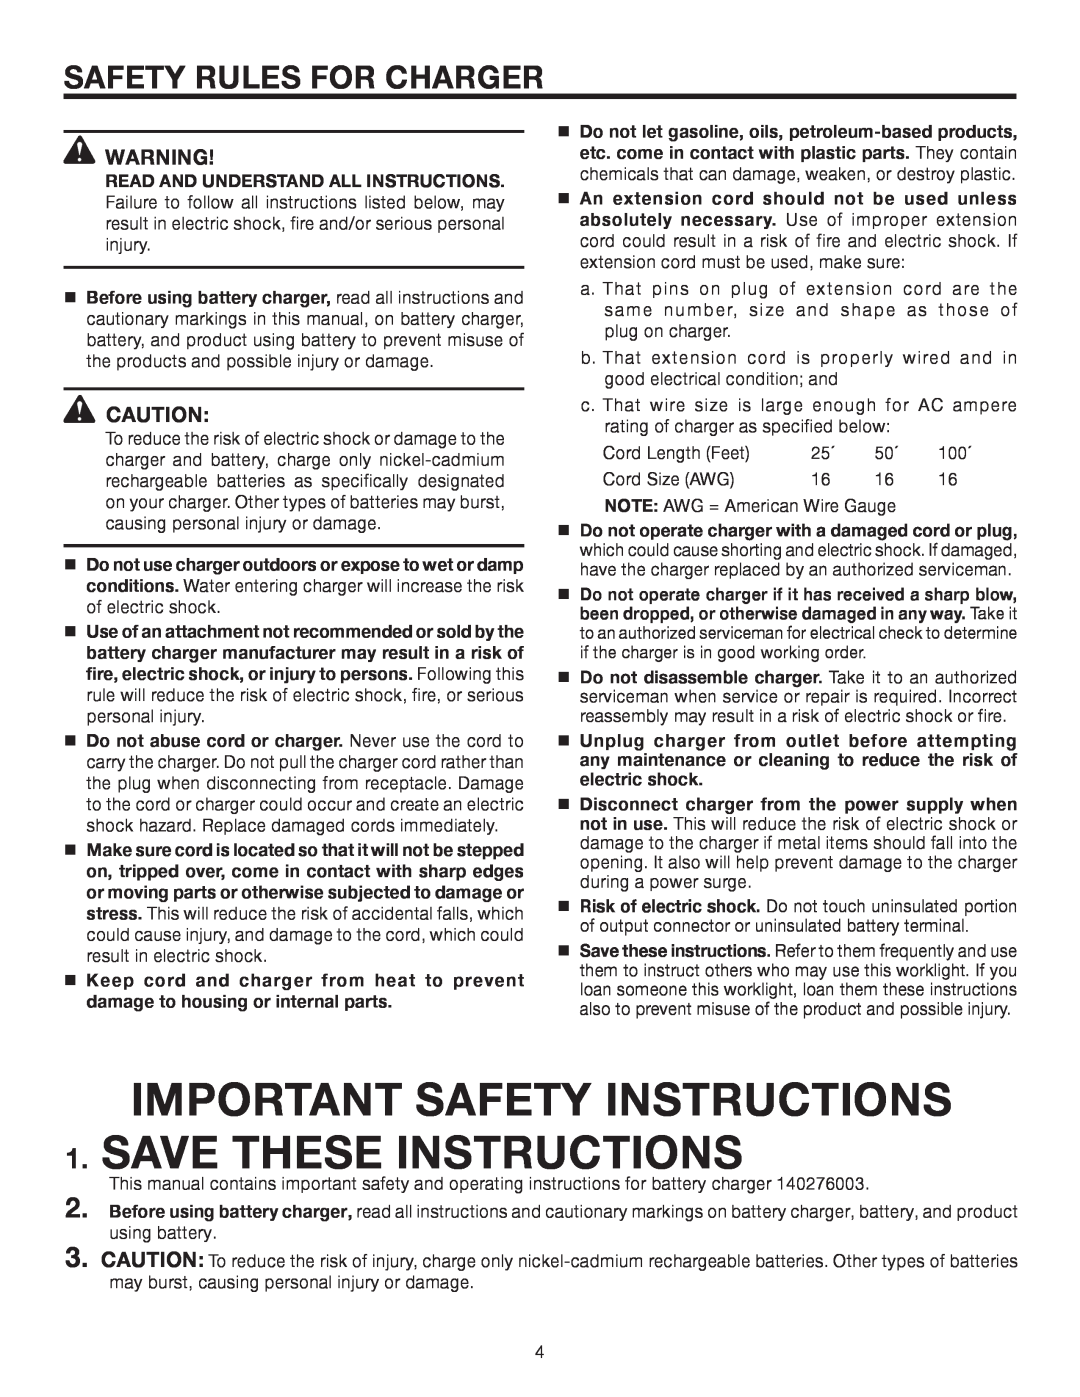 RIDGID R849 manual Safety Rules For Charger, IMPORTANT SAFETY INSTRUCTIONS 1. SAVE THESE INSTRUCTIONS 